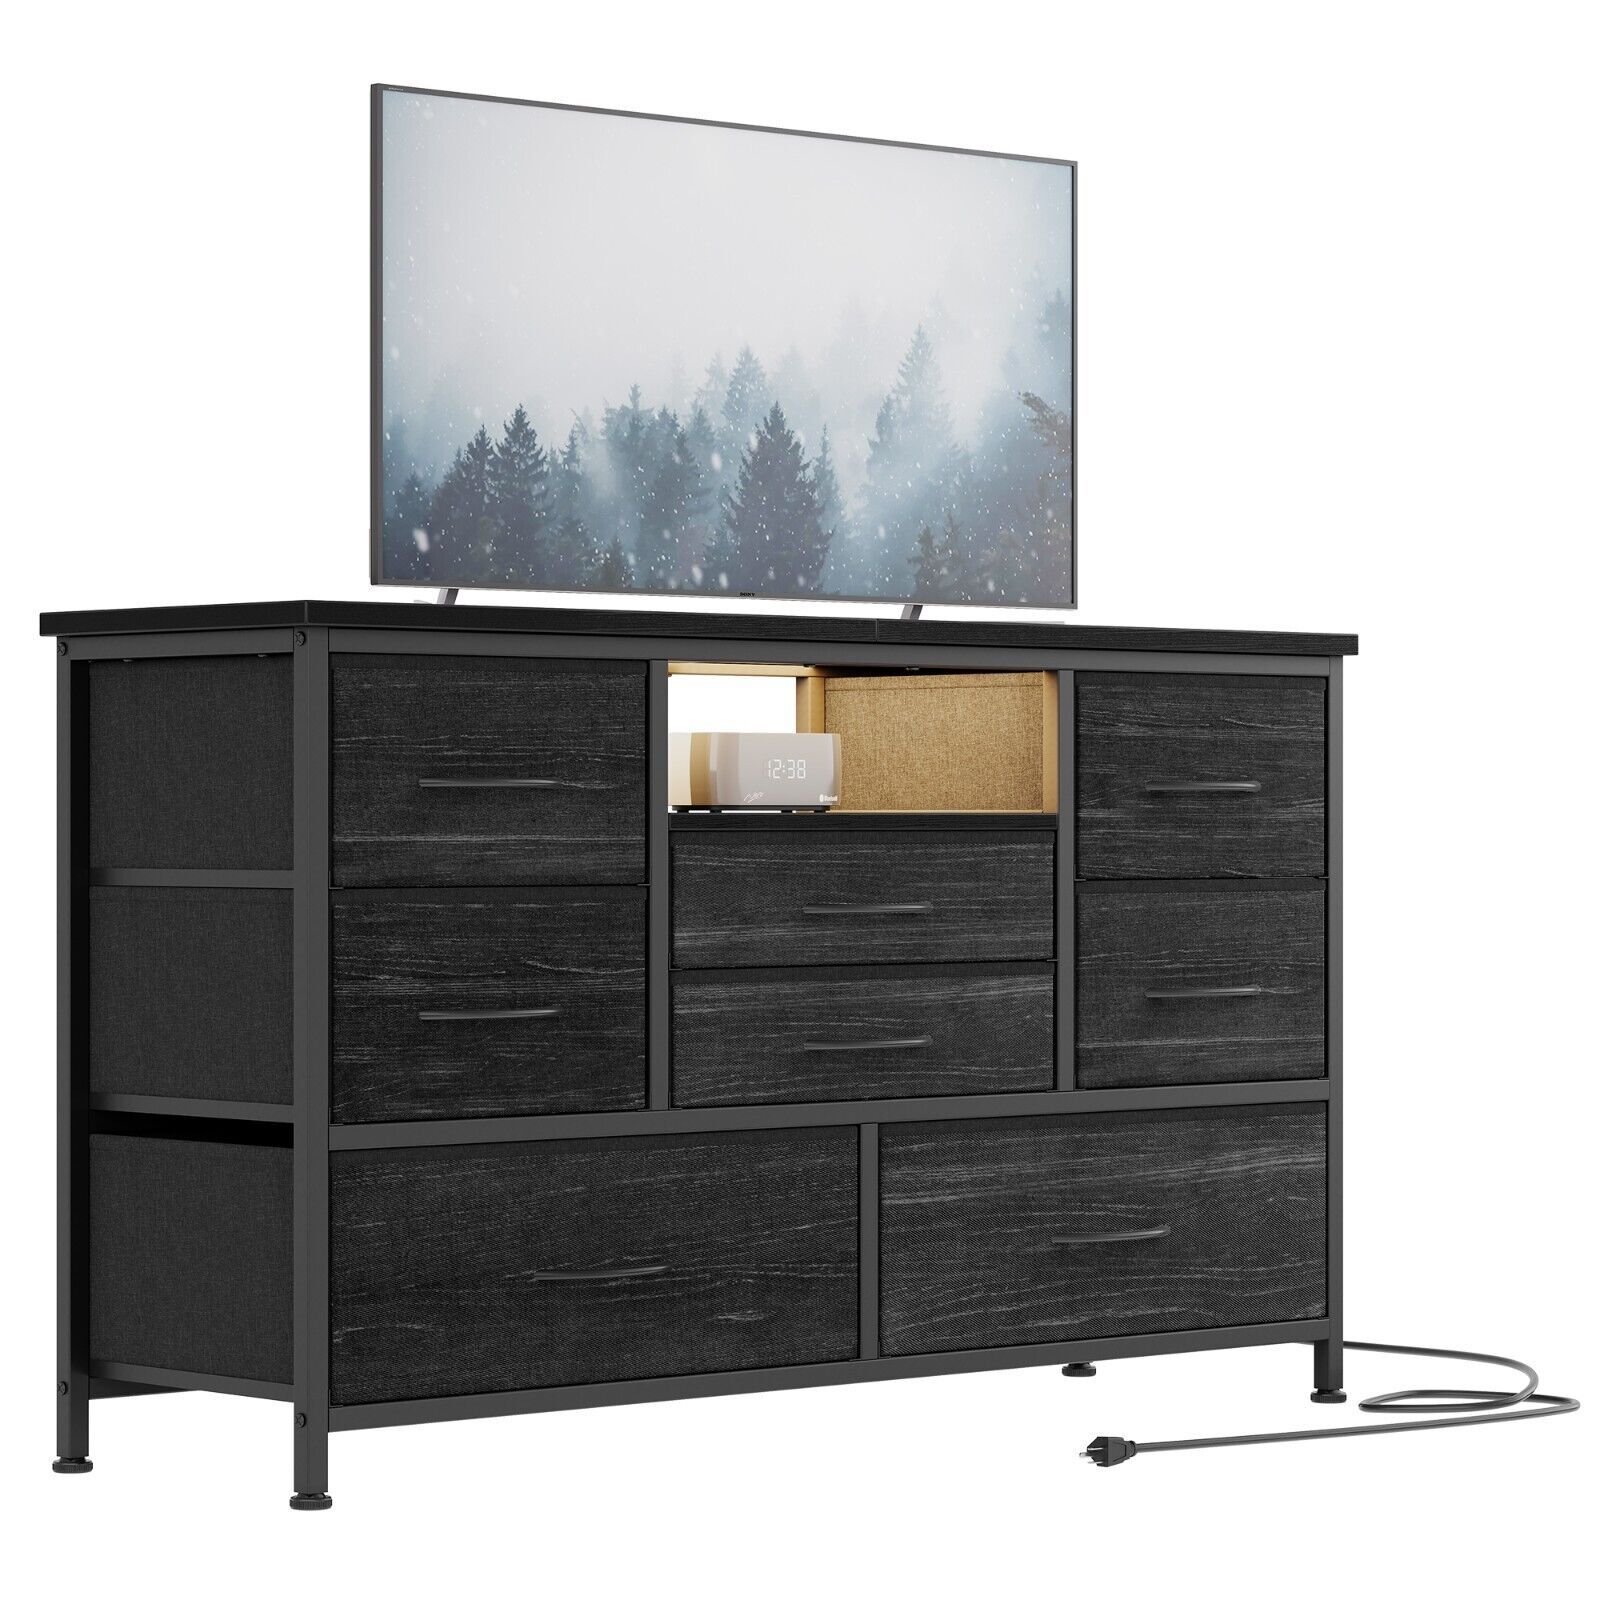 Dresser Tv Stand With Led Light Power Outlet Bedroom Chest Of Drawer For  55'' Tv | Fabricating And Metalworking Regarding Led Tv Stands With Outlet (View 15 of 15)